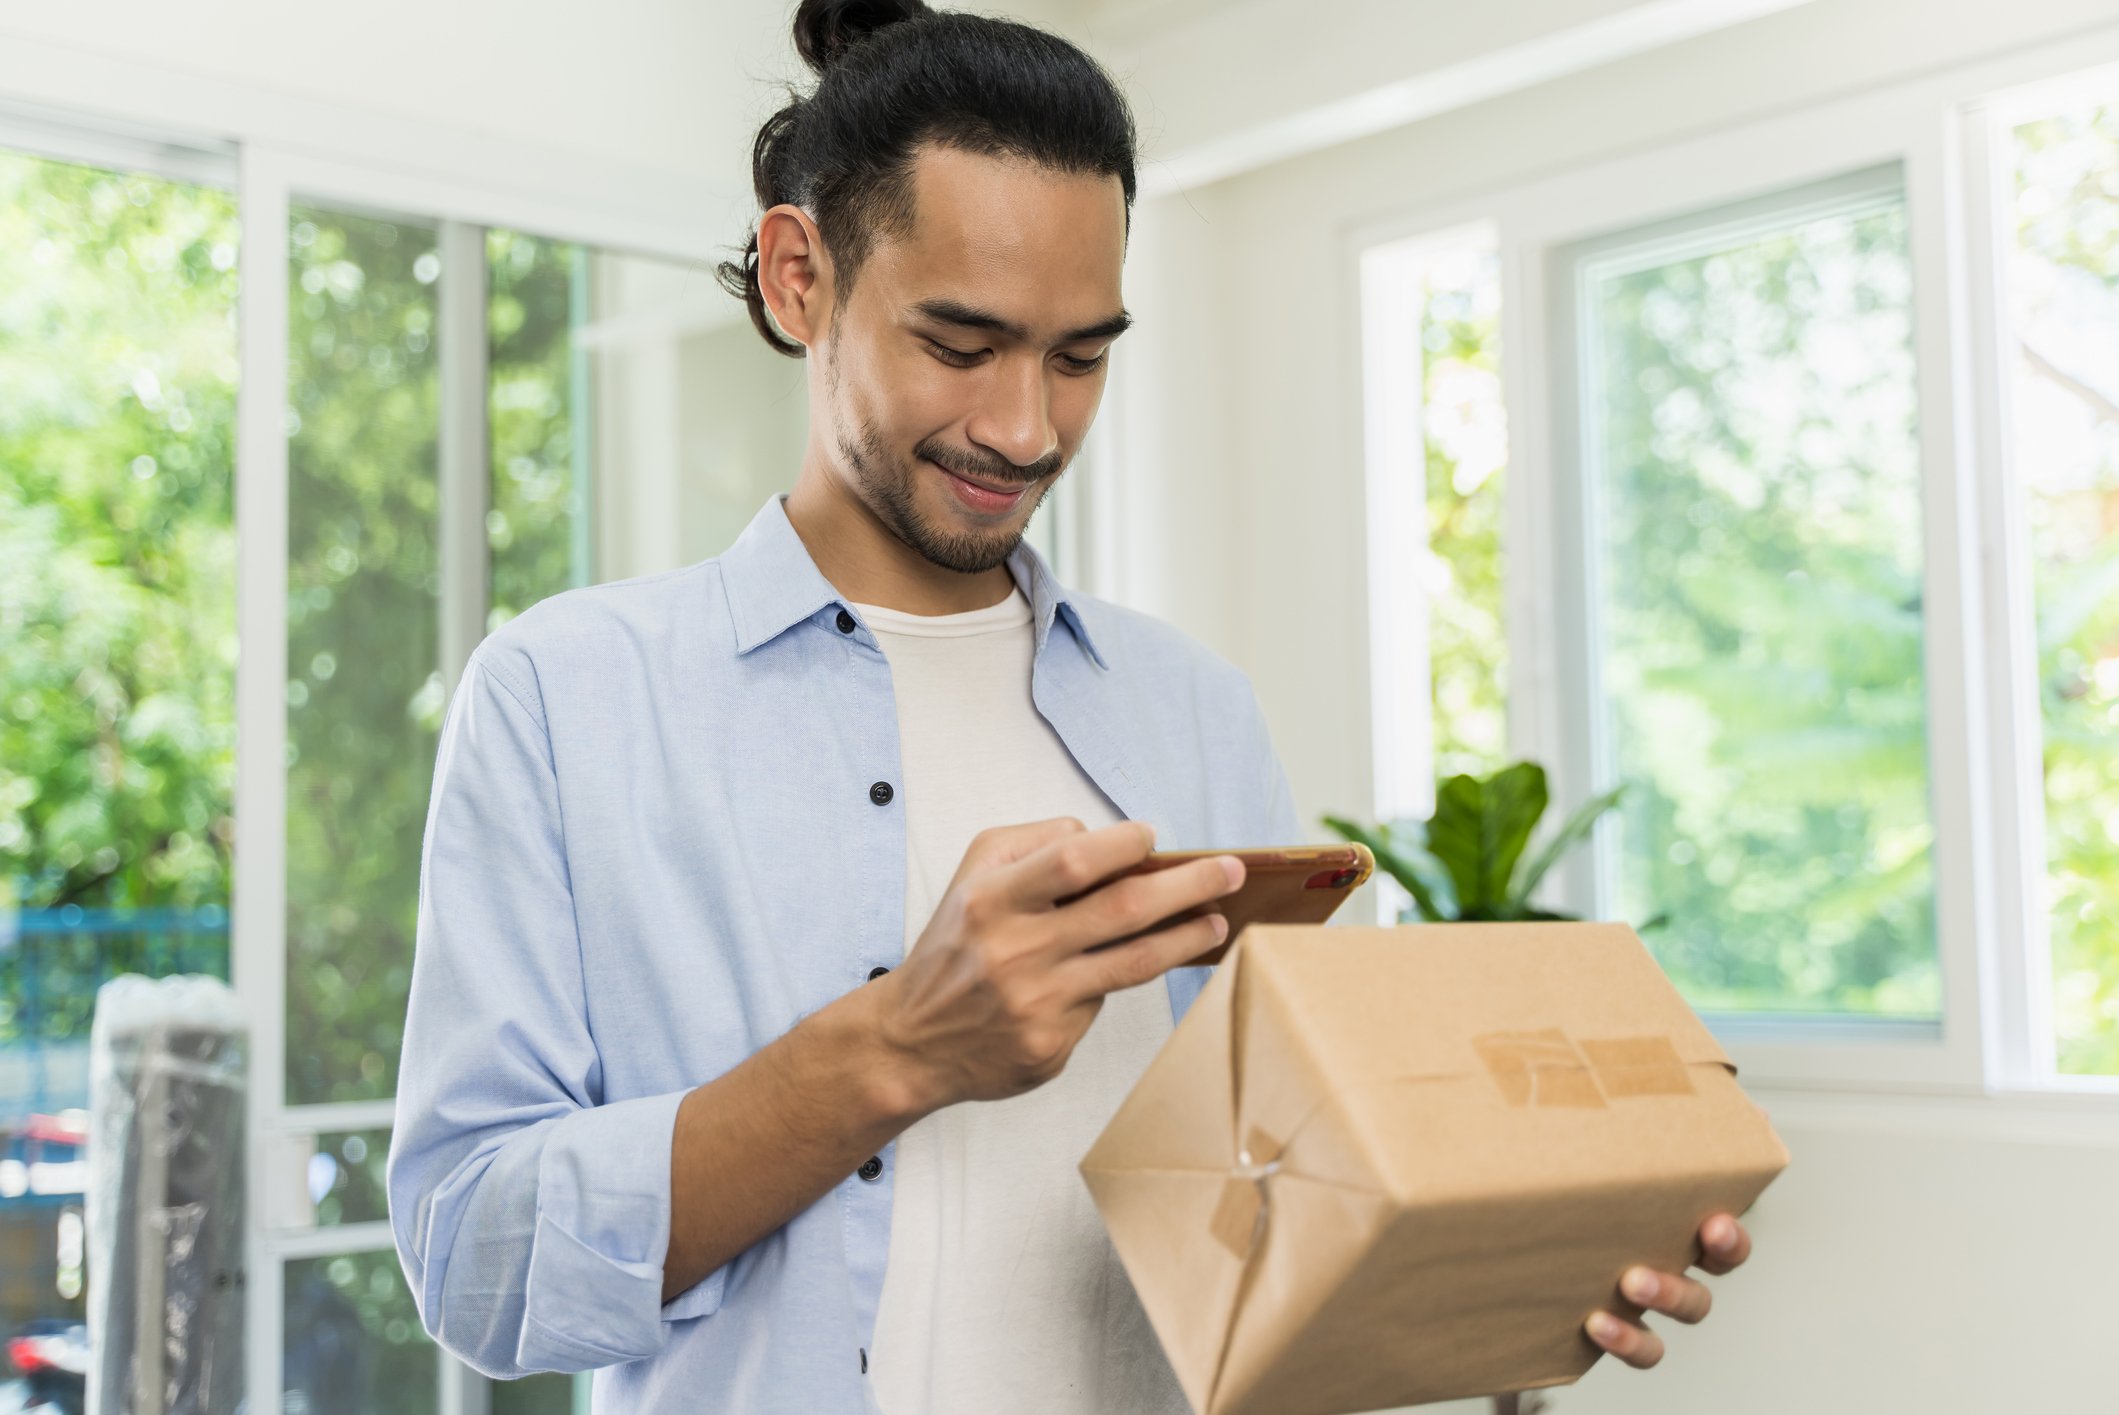 person smiling while looking at phone and parcel